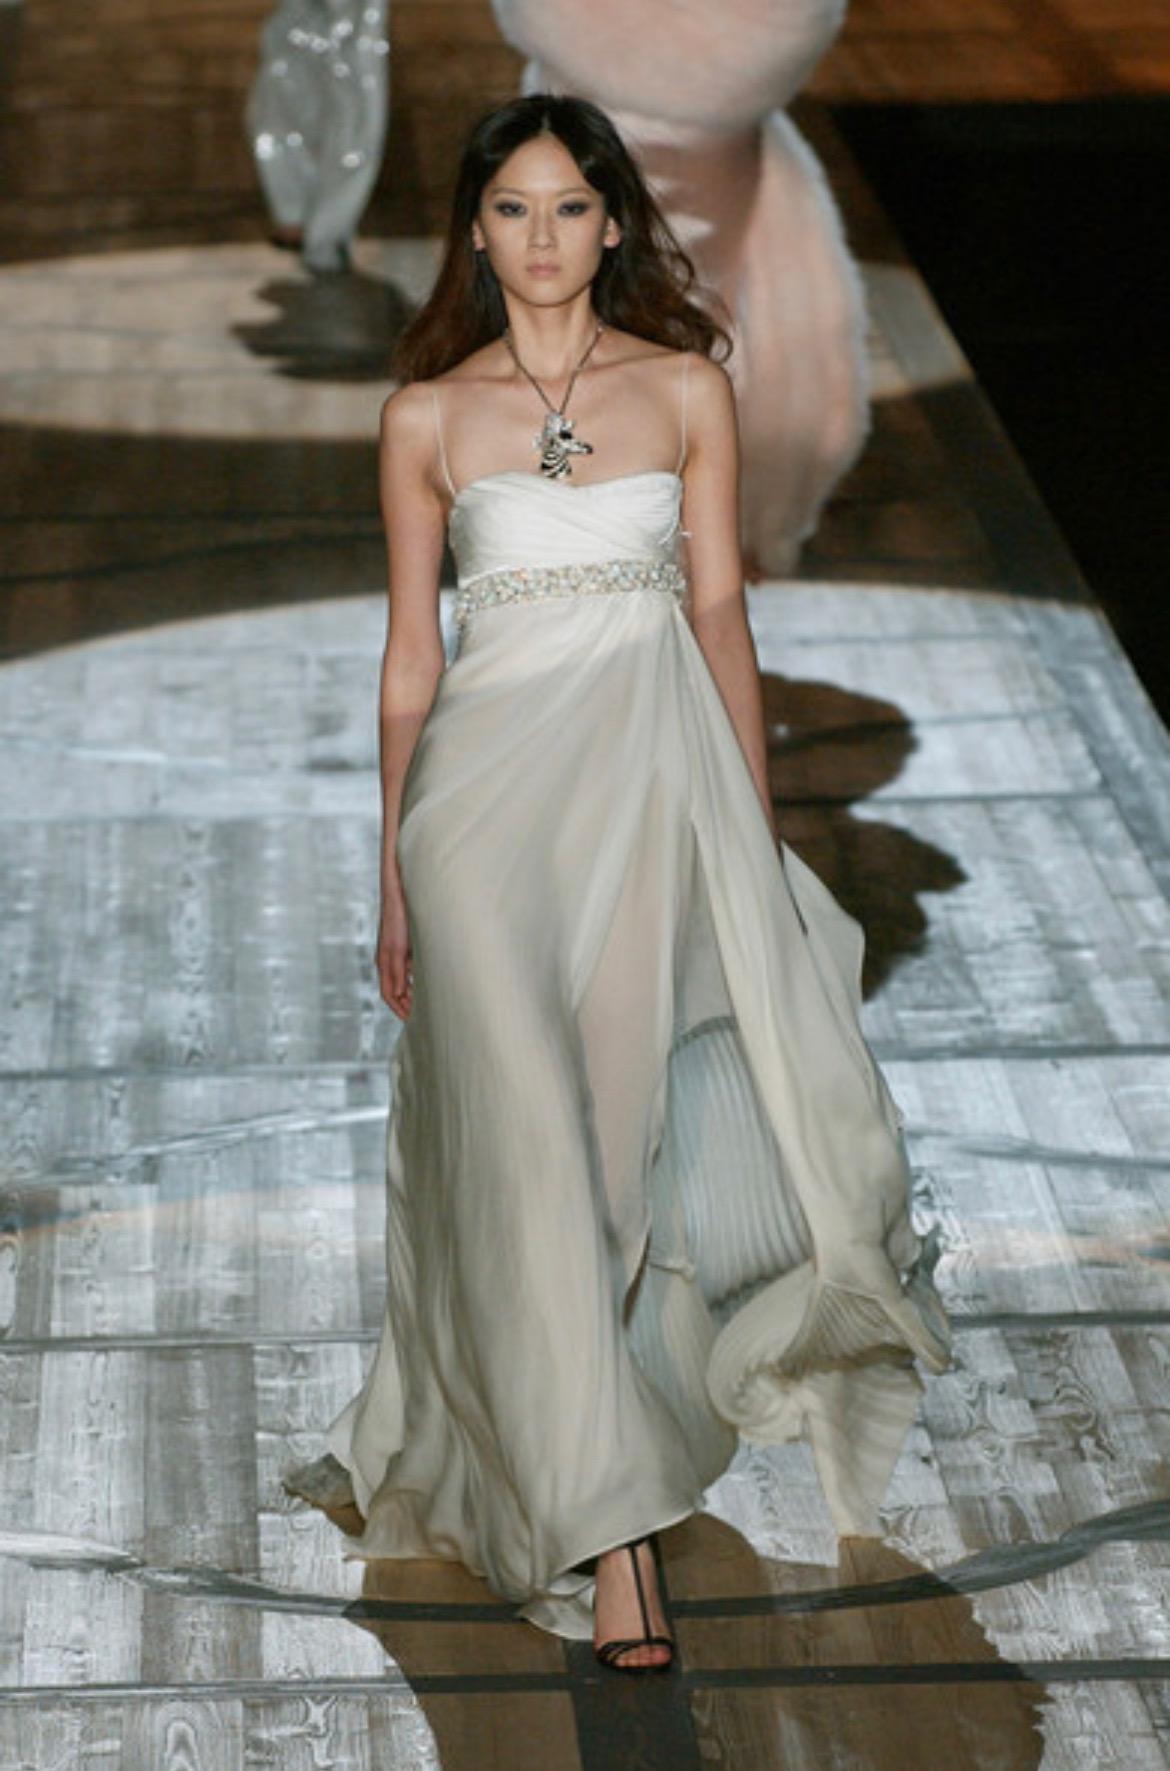 Presenting a fabulous deep purple Roberto Cavalli gown. From the Fall/Winter 2005 collection, this stunning floor-length gown debuted on the season's runway in white as look 66 modeled by Hye Park. This incredible gown was also seen on Carmen